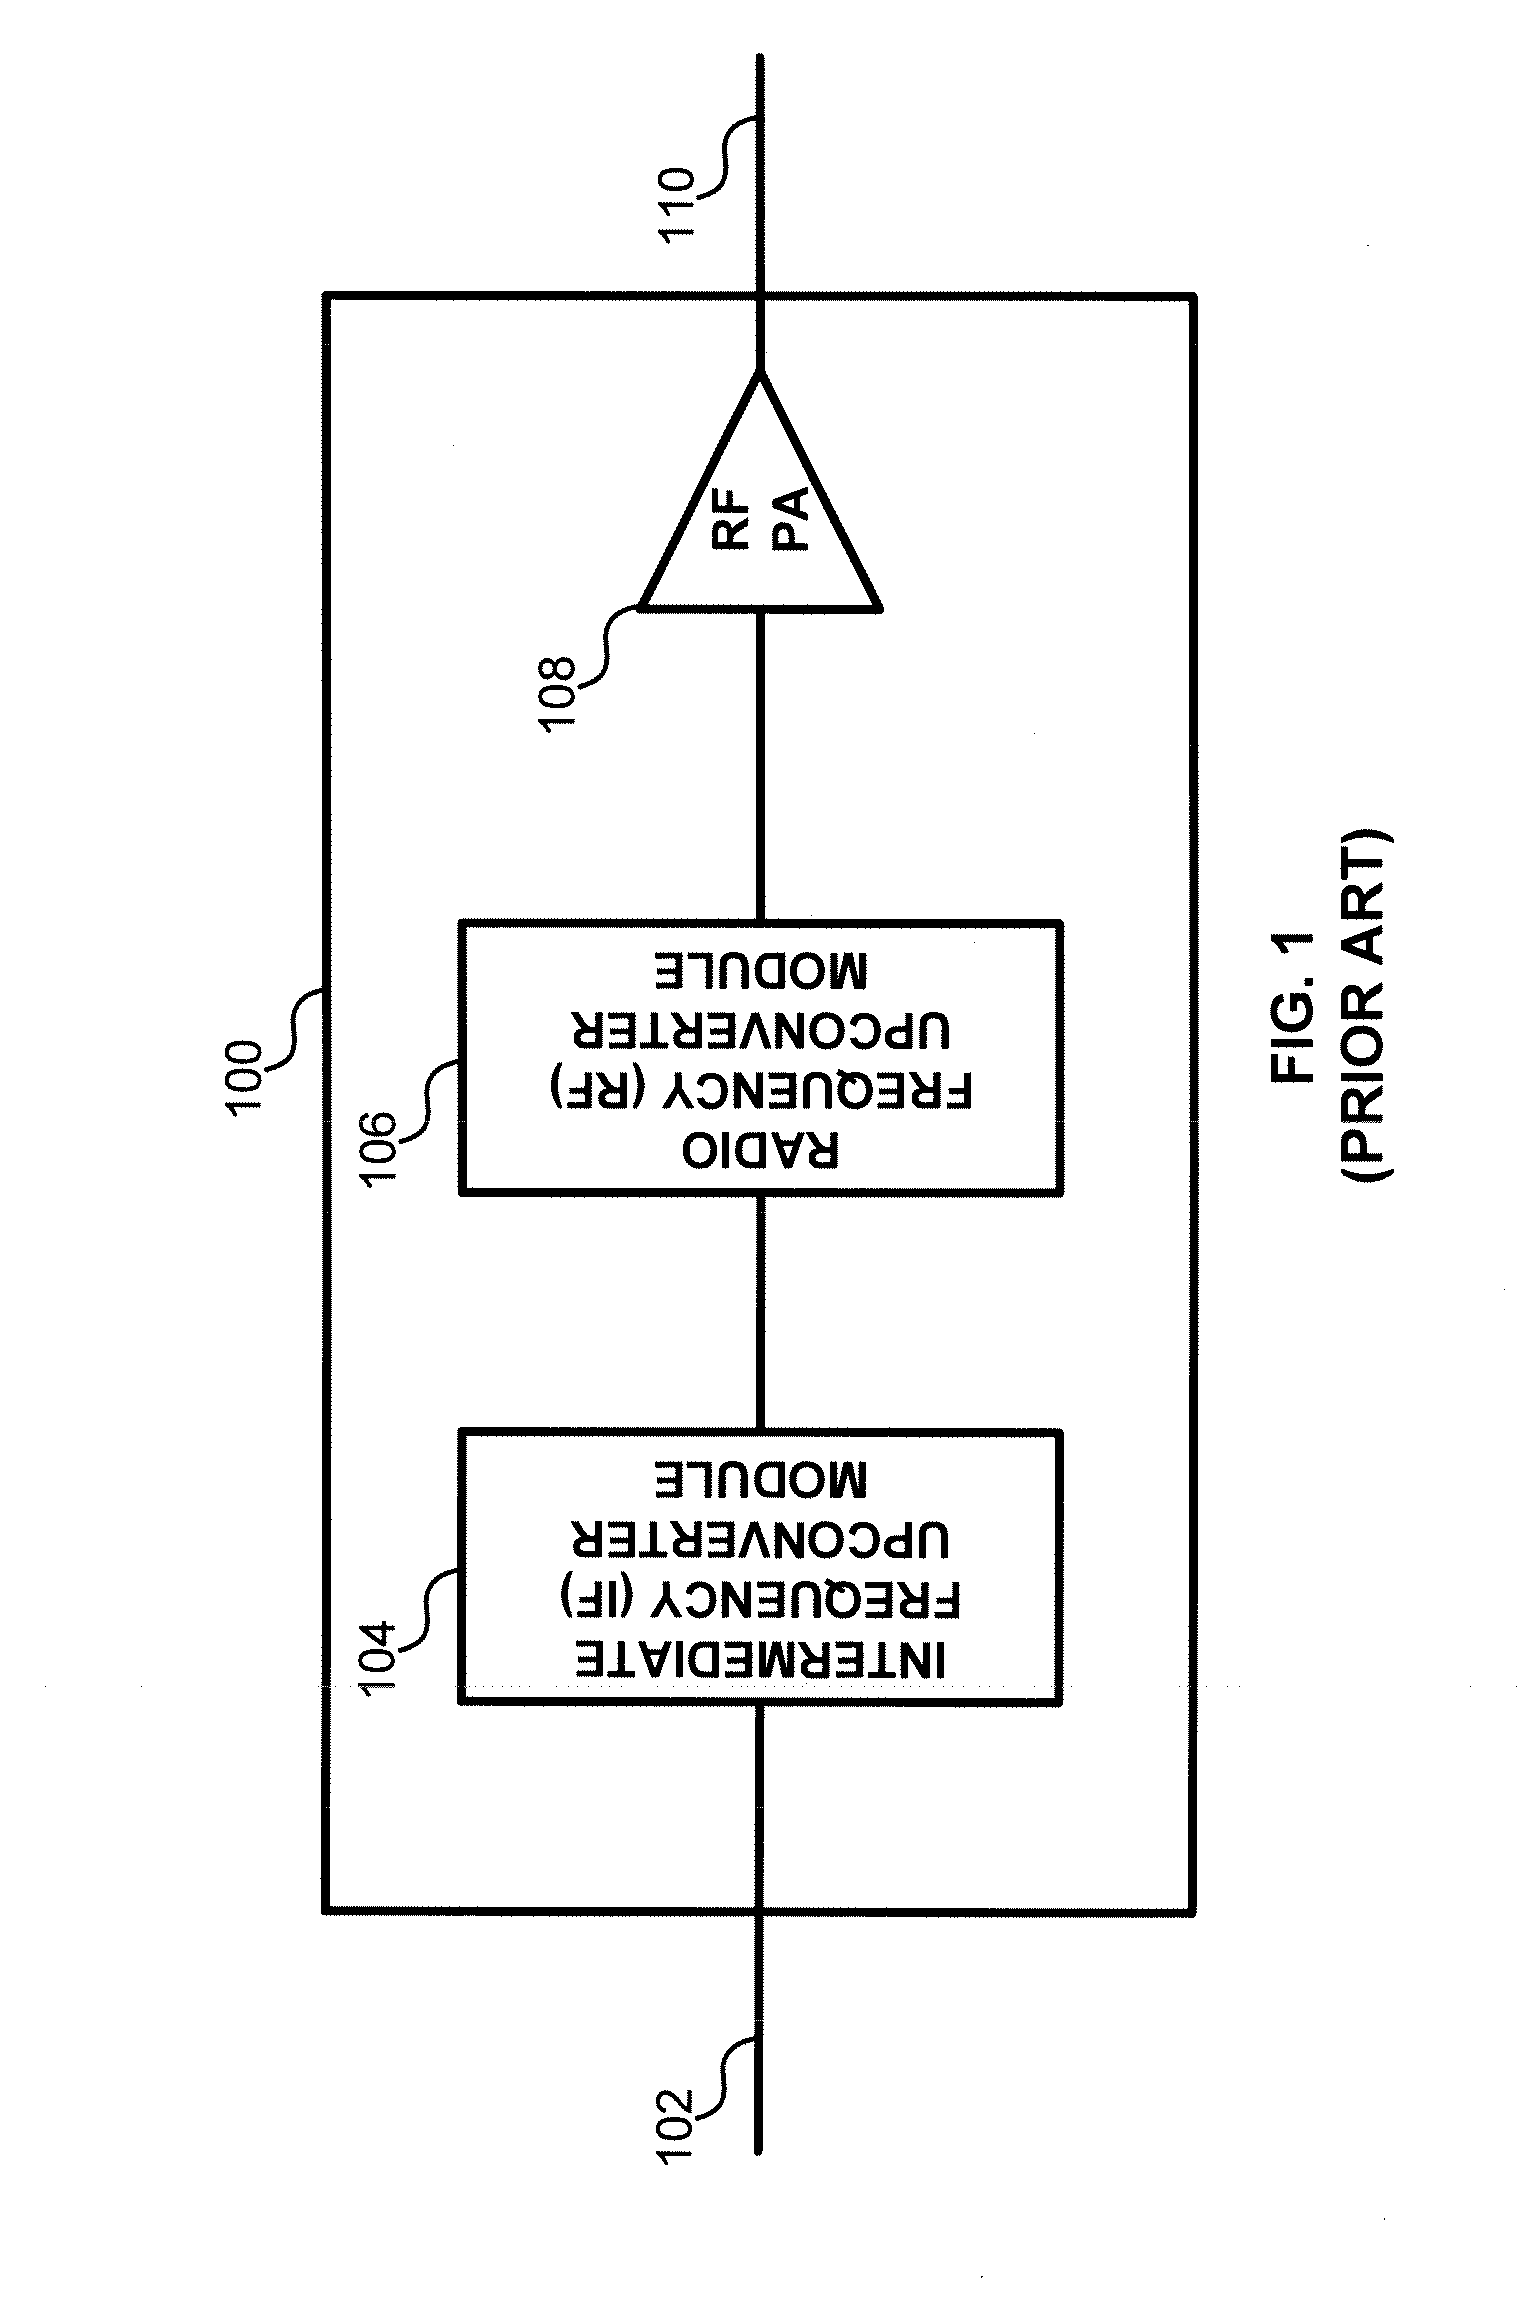 Systems and methods for improved power yield and linearization in radio frequency transmitters